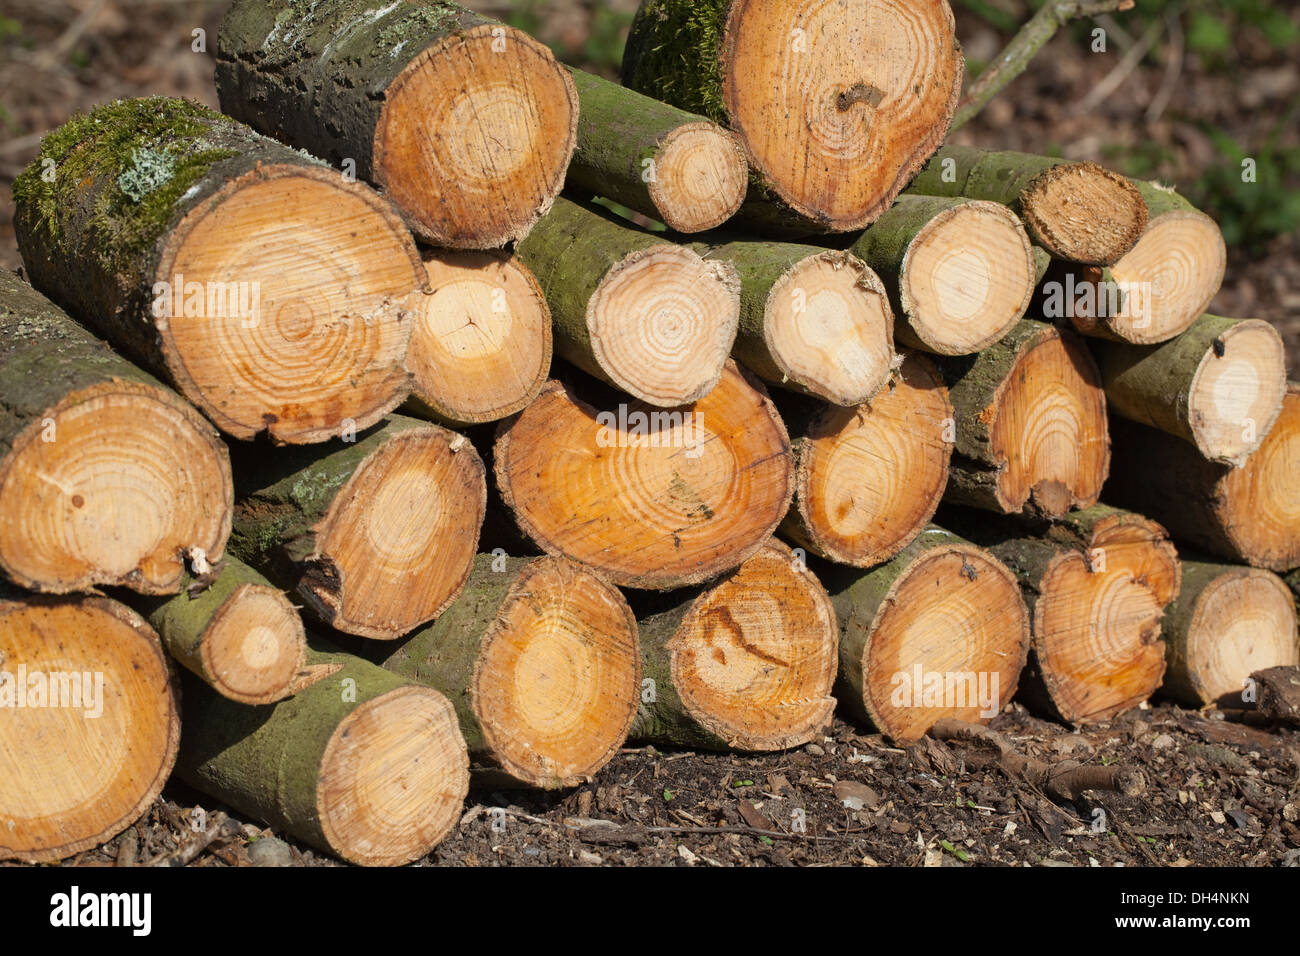 Common Ash (Fraxinus excelsior). Freshly cut, chain sawn logs. Stock Photo